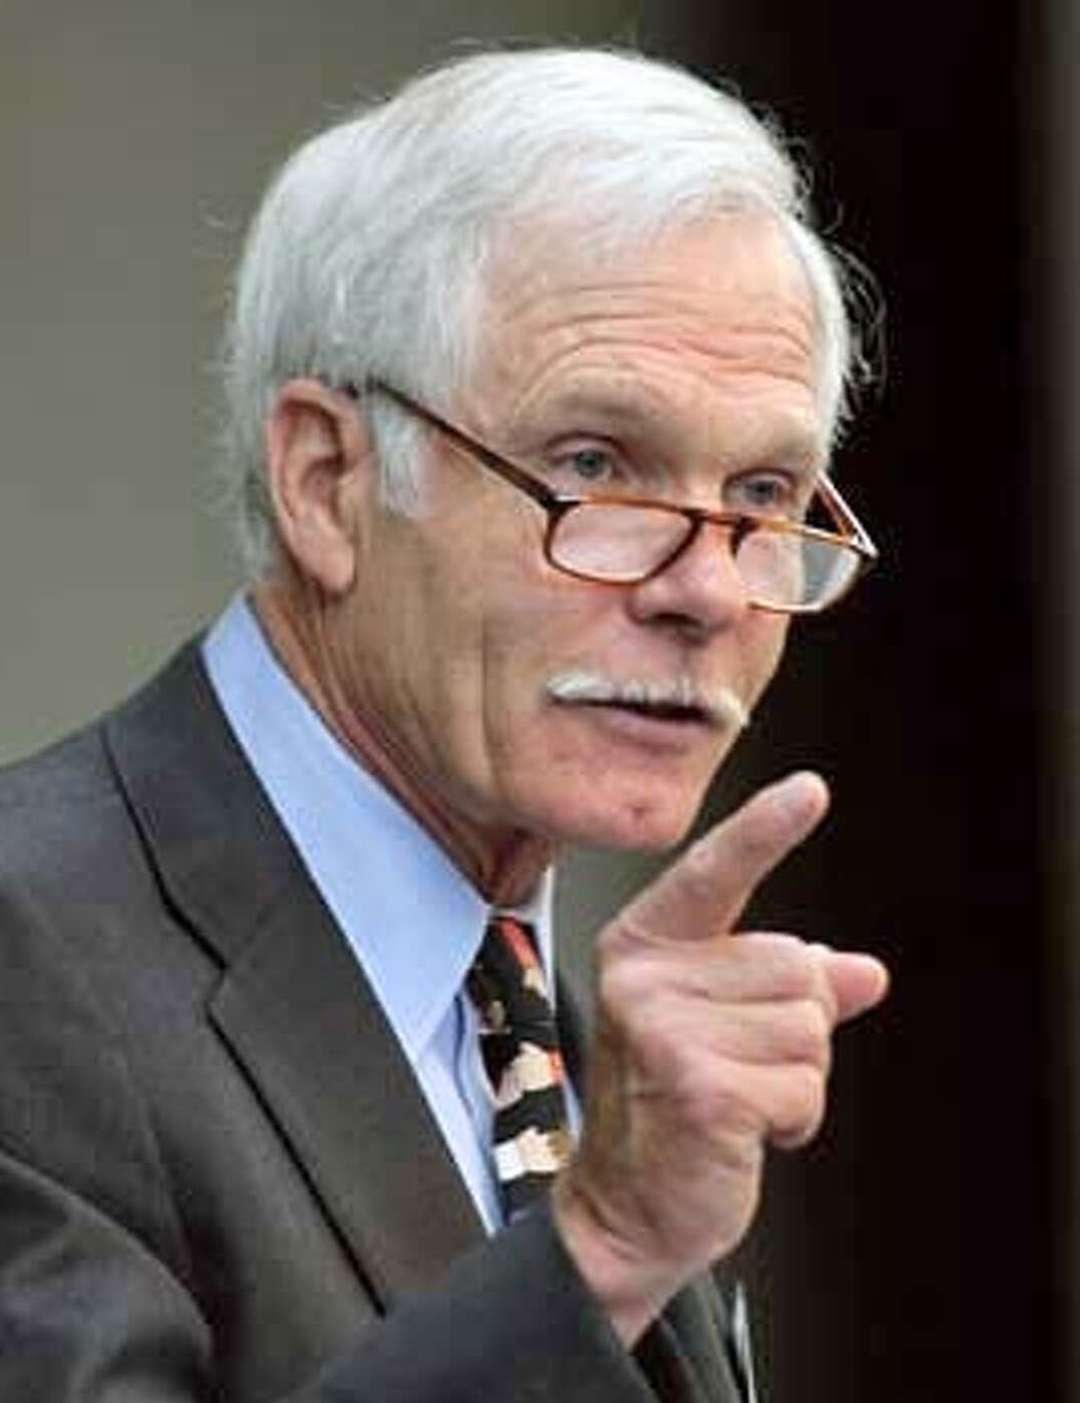 Ted Turner, founder of CNN, Club of Rome member, founder of the United Nations Foundation, depopulation fanatic, and major UN donor.